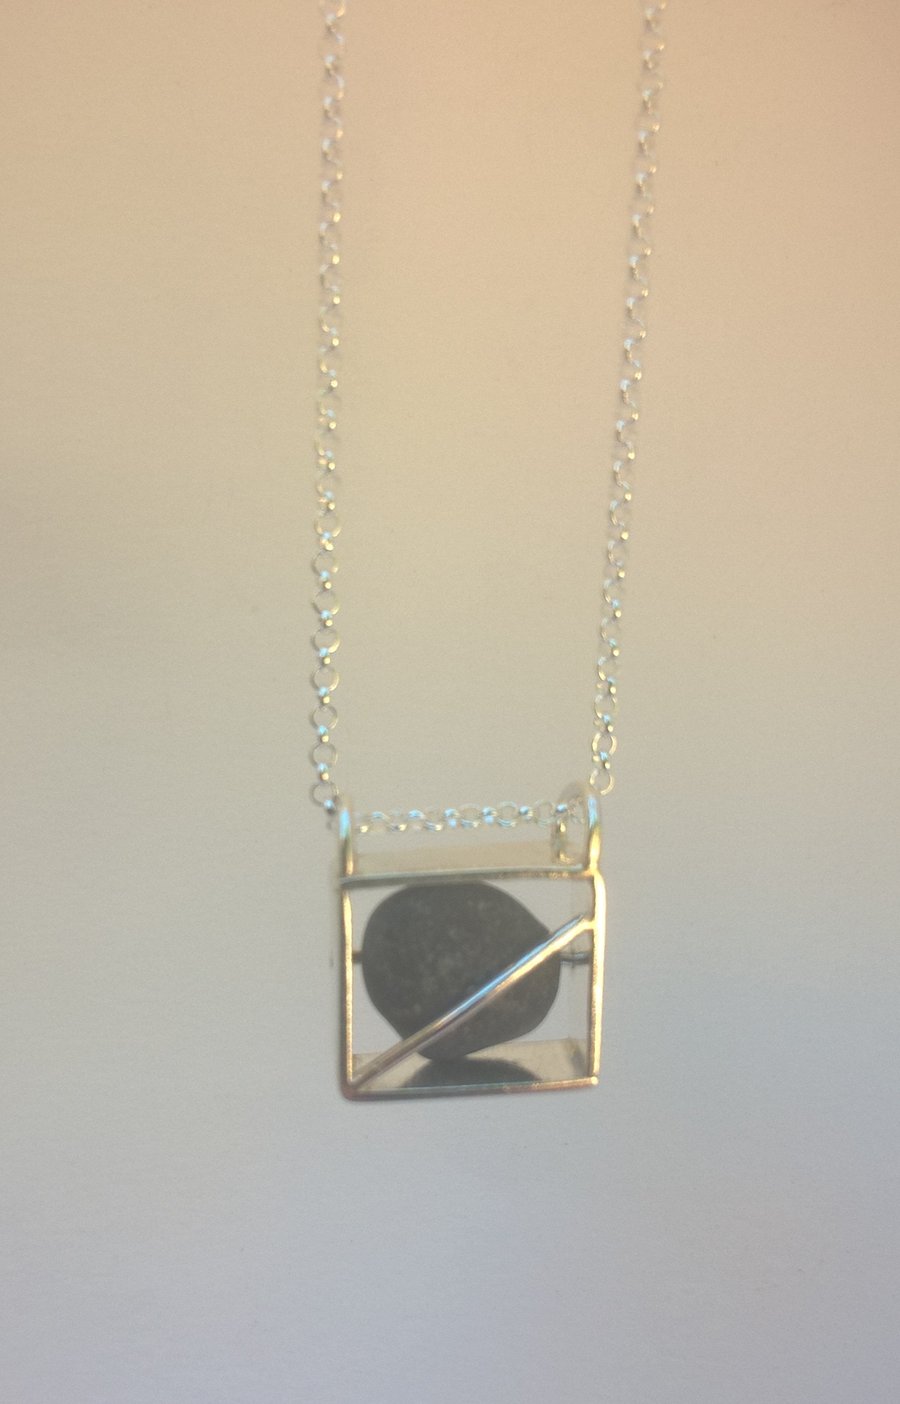 Pebble in a Silver Box Necklace